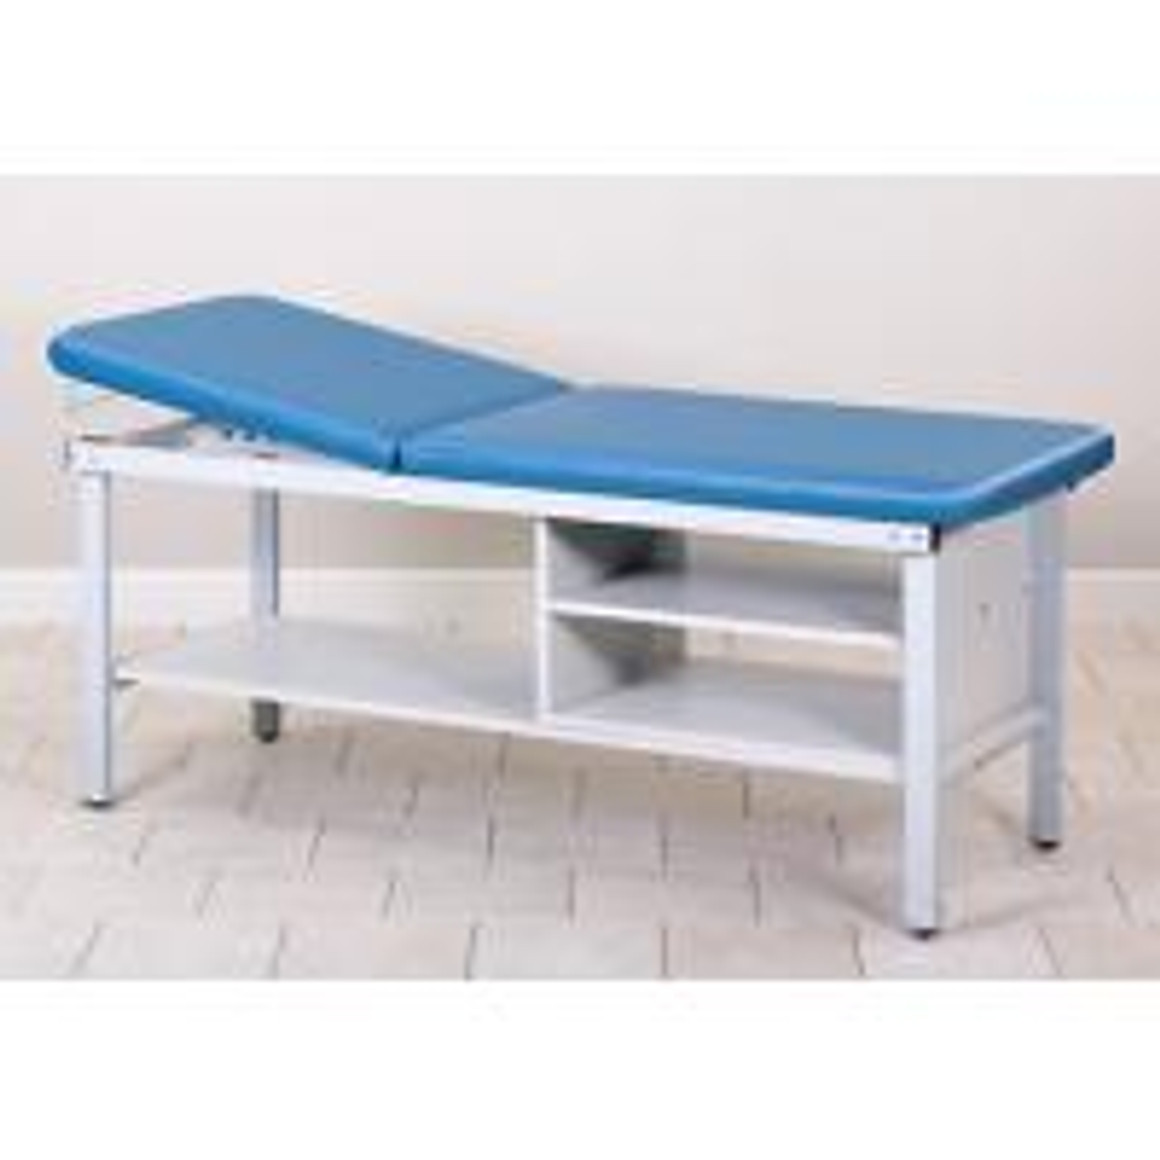 Clinton ETA Alpha Series Straight Line Treatment Table with Shelving Unit, 30" Wide, China Gree